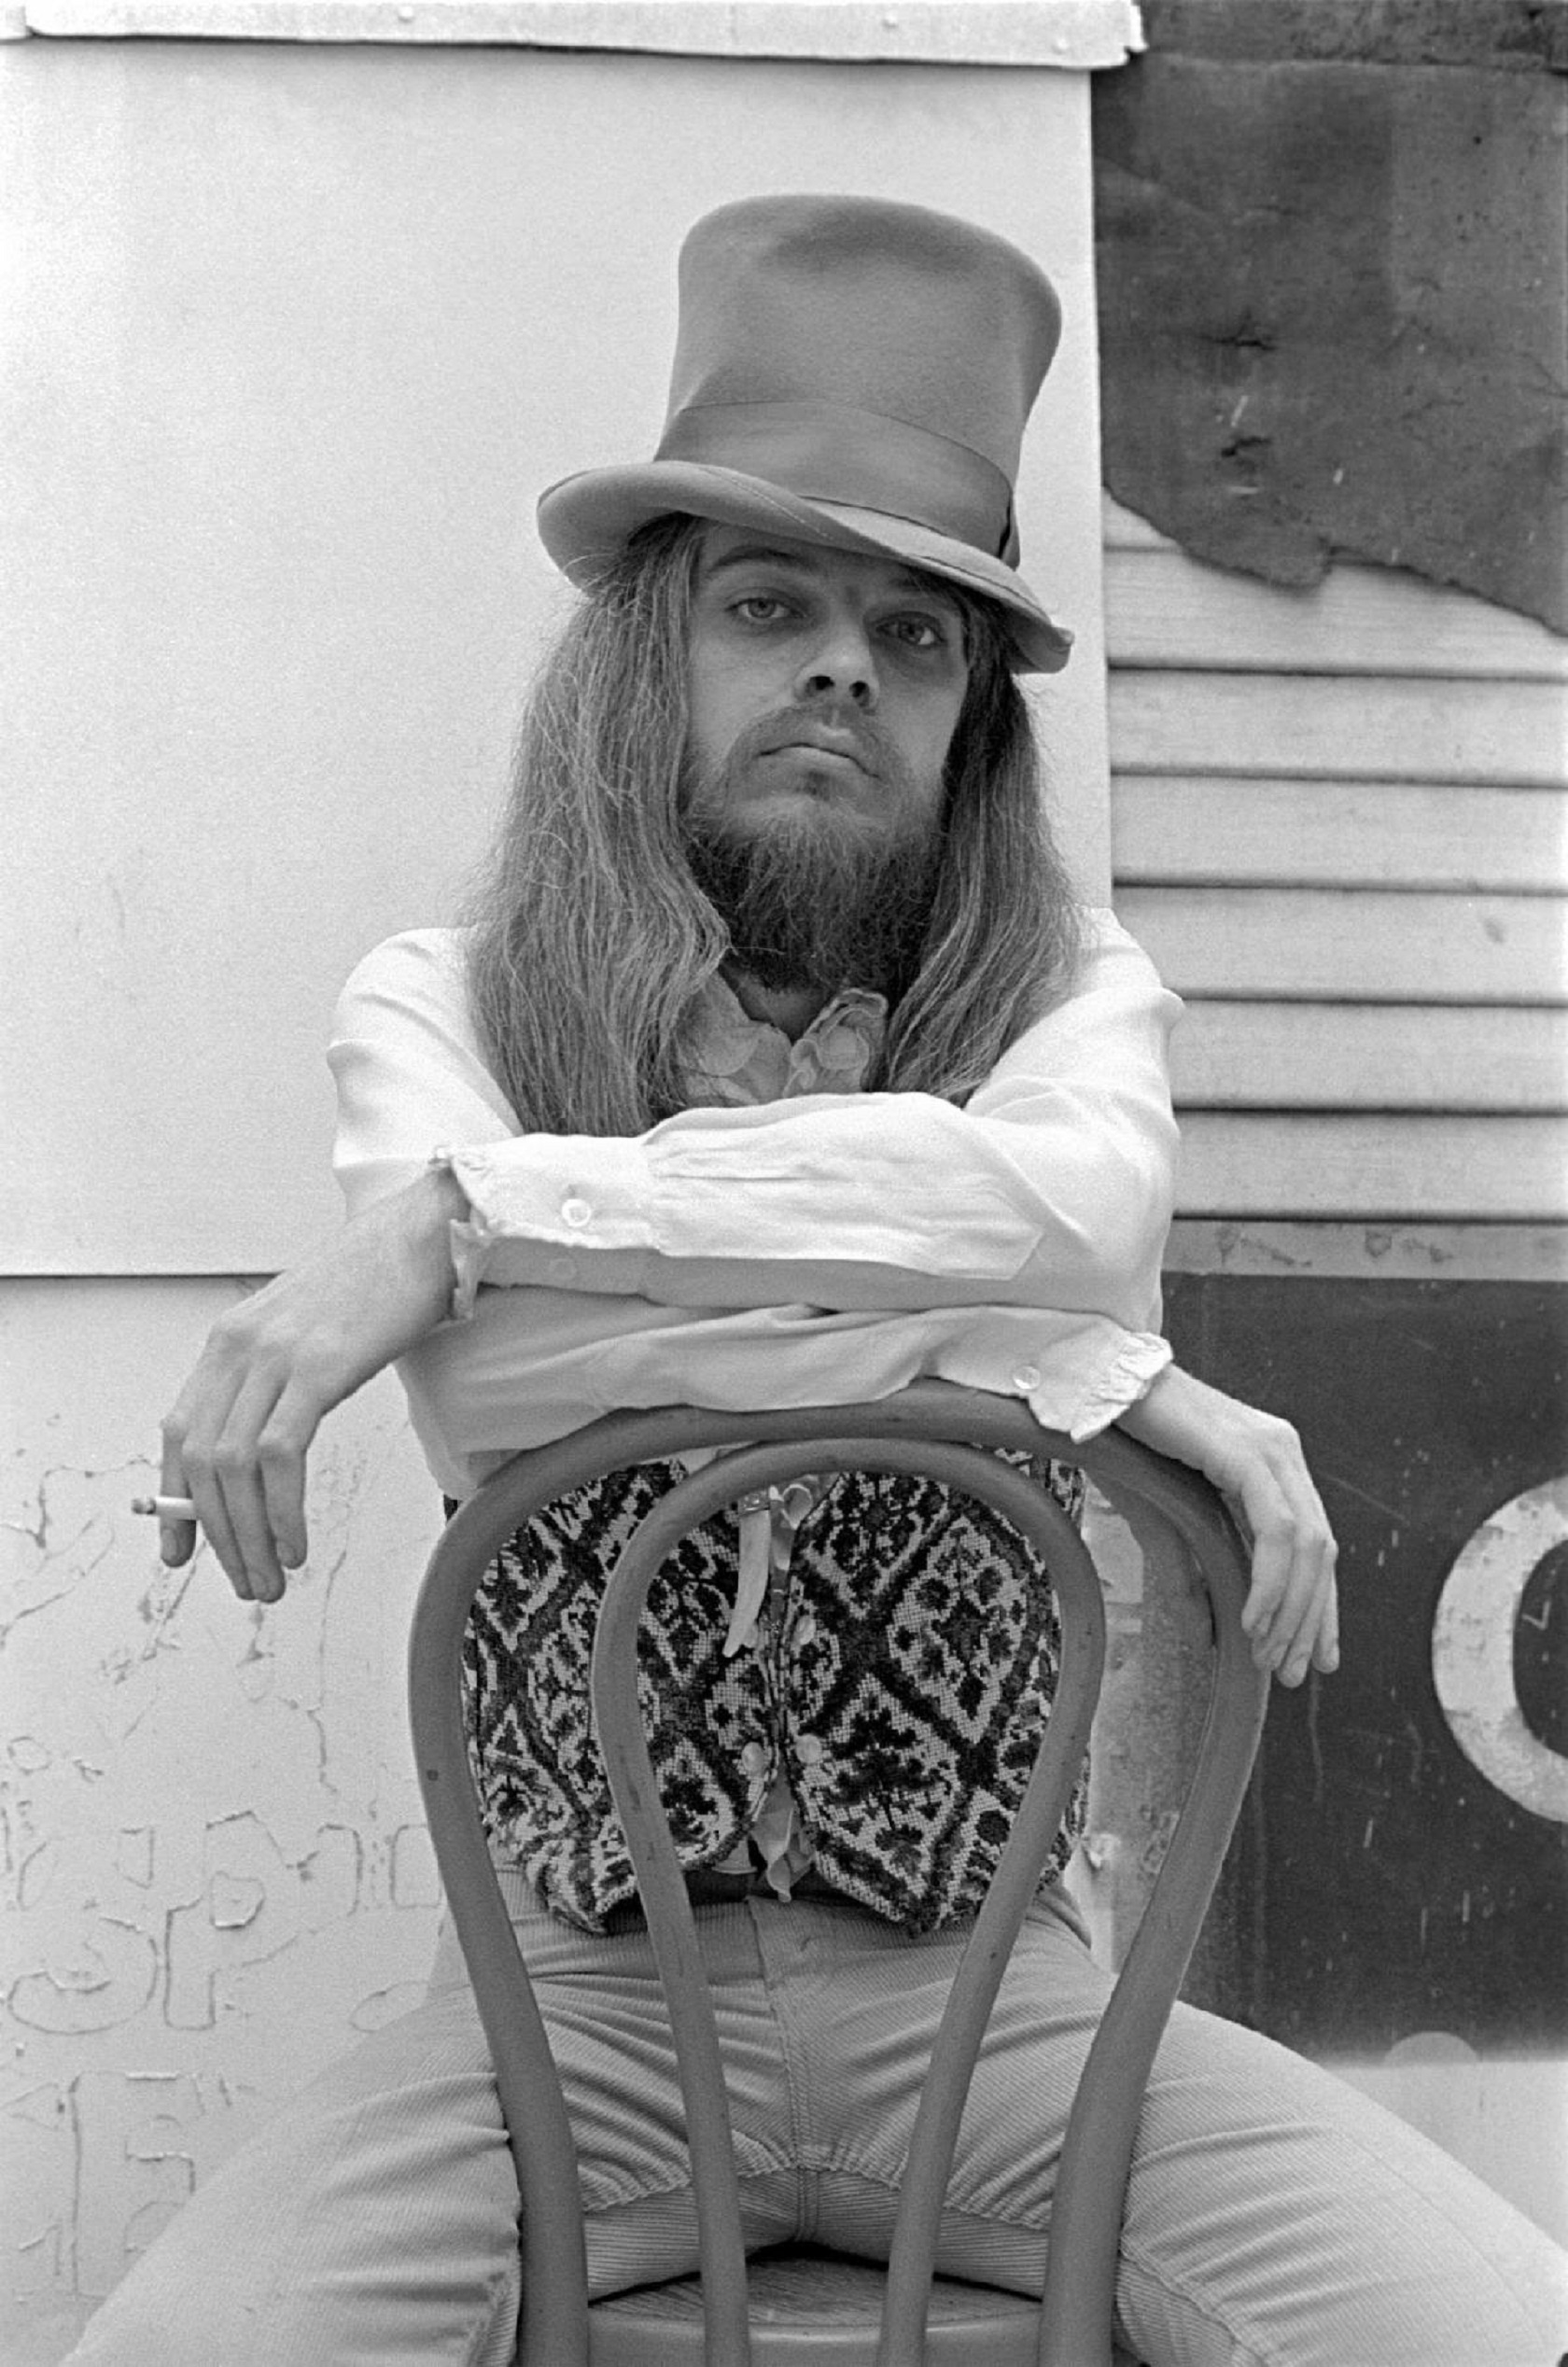 New Edition Of Leon Russell’s 'Signature Songs' Out Today